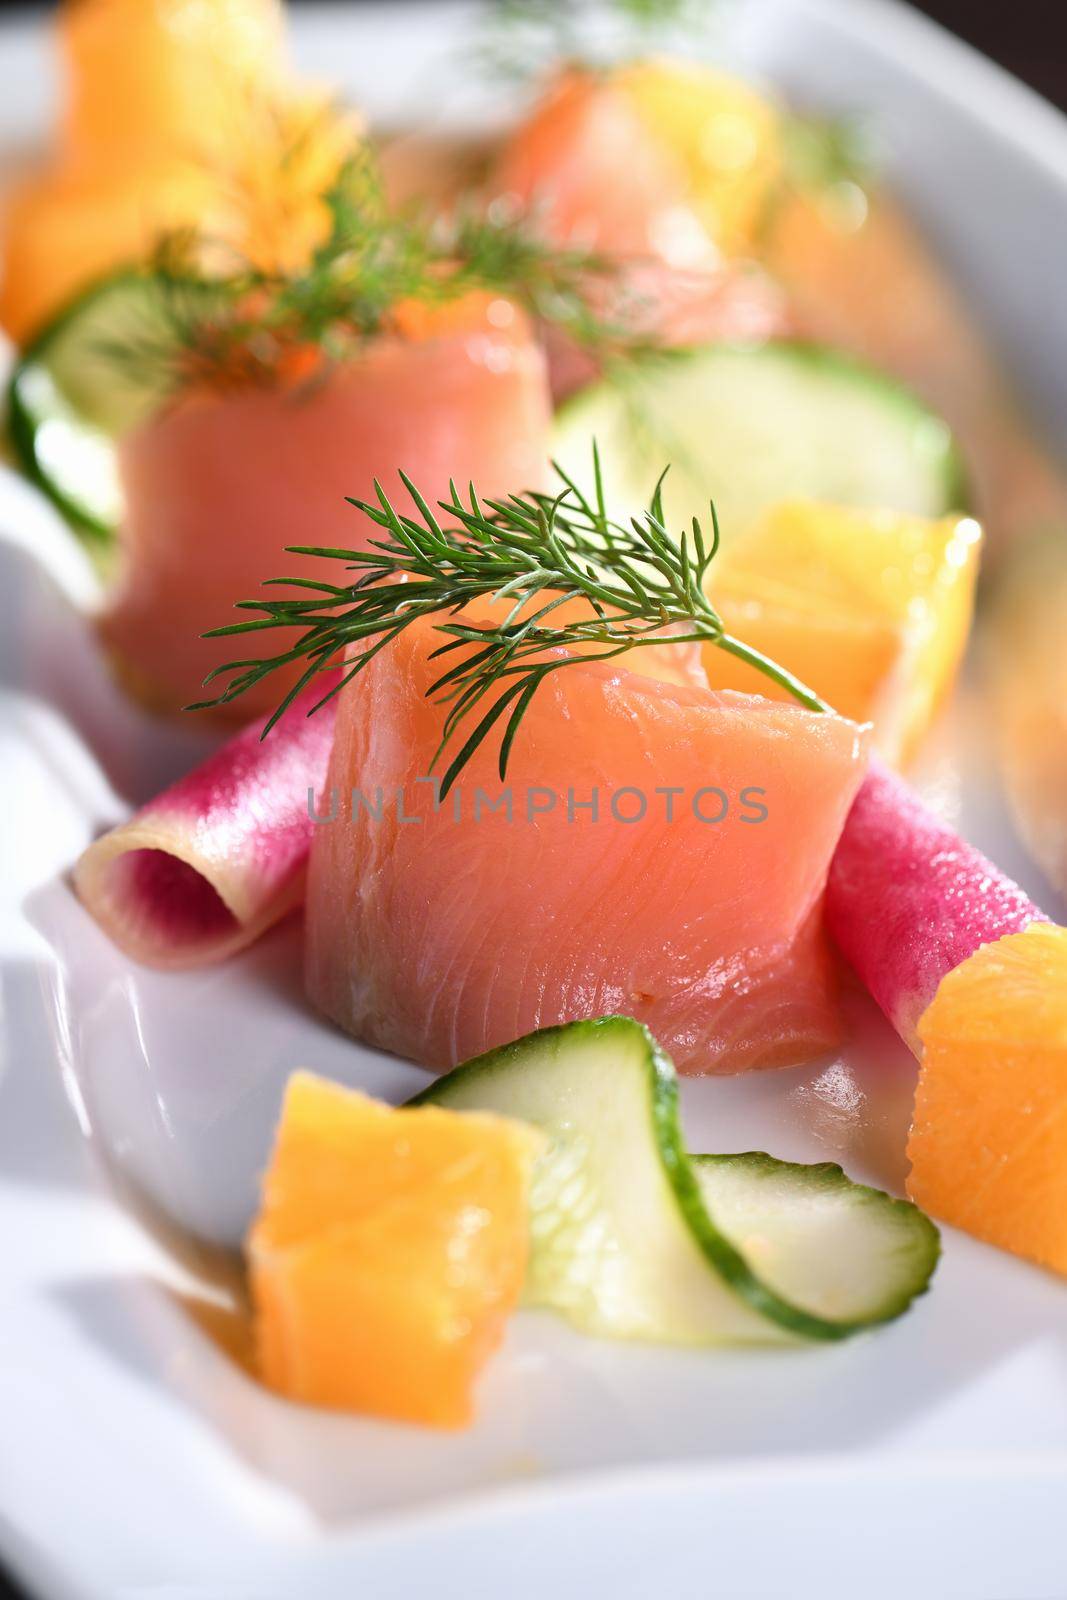 Pickled salmon appetizer by Apolonia